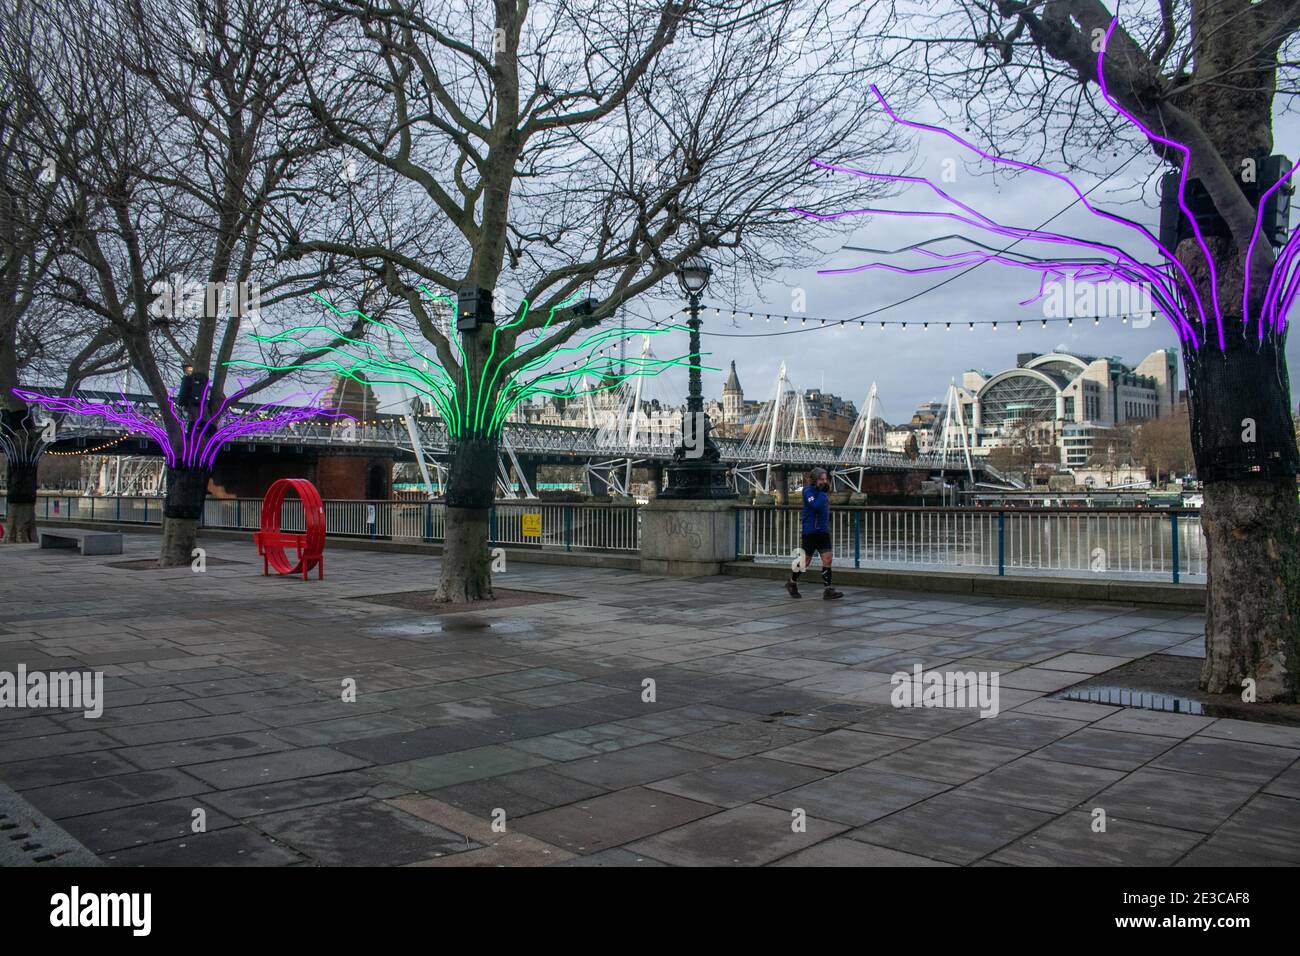 WESTMINSTER  LONDON, UK  18 January 2021.  David Ogle installation Loomin. London Southbank along the Thames river  embankment  is quiet on a Monday morning  during the new coronavirus lockdown. The government has pleaded with the public and urged Londoners to adhere to lockdown rules which were introduced to combat  the spread of a new  COVID-19 mutant strain. Credit: amer ghazzal/Alamy Live News Stock Photo